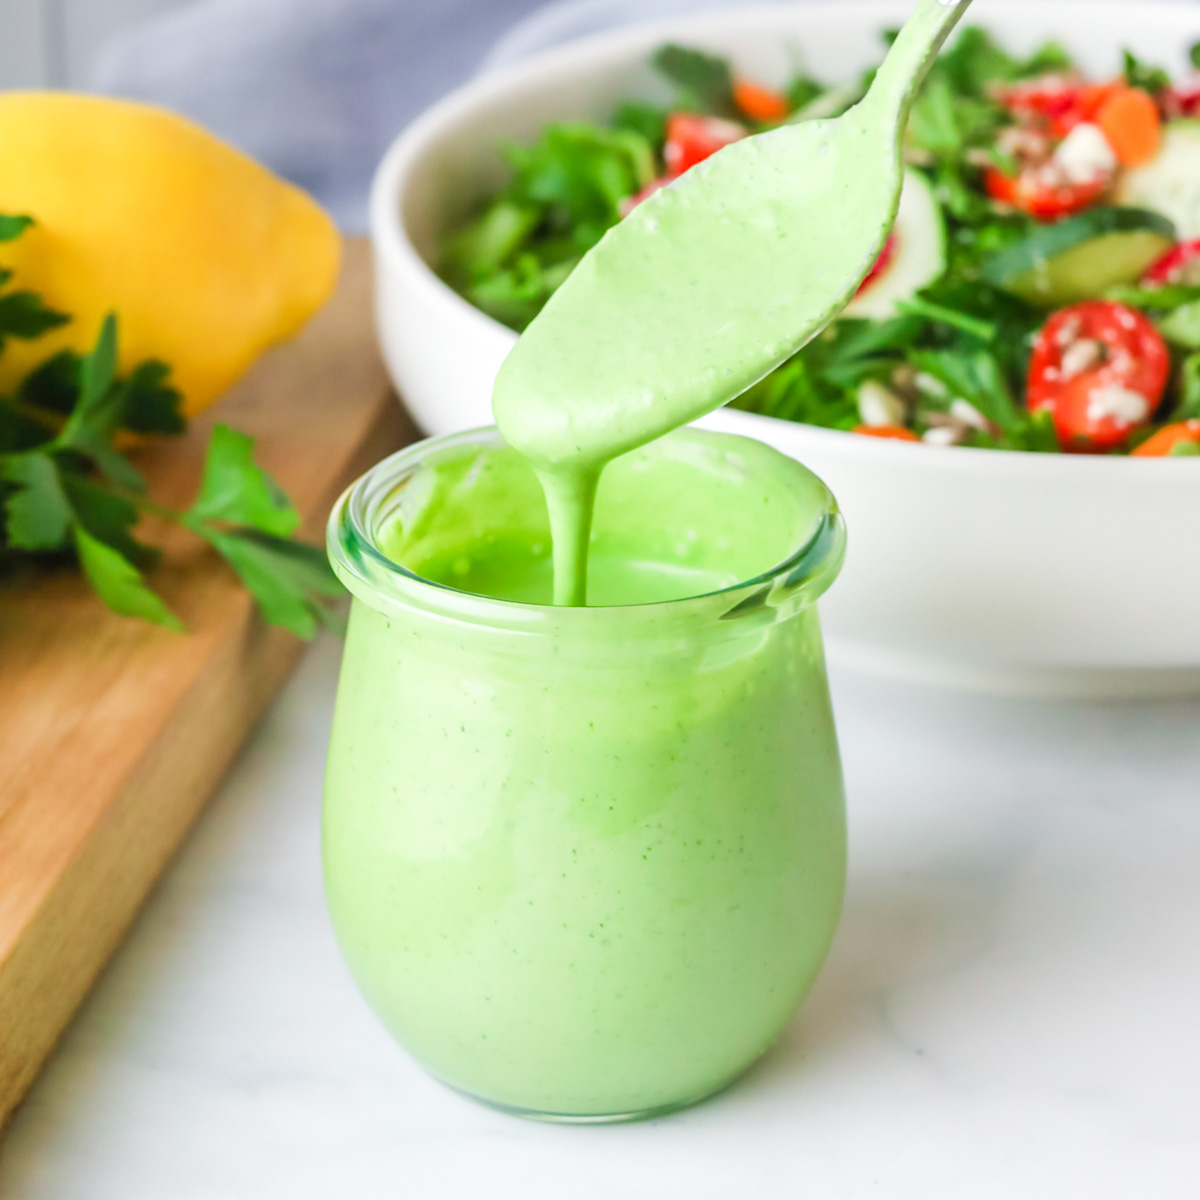 Green goddess dressing with a spoon.